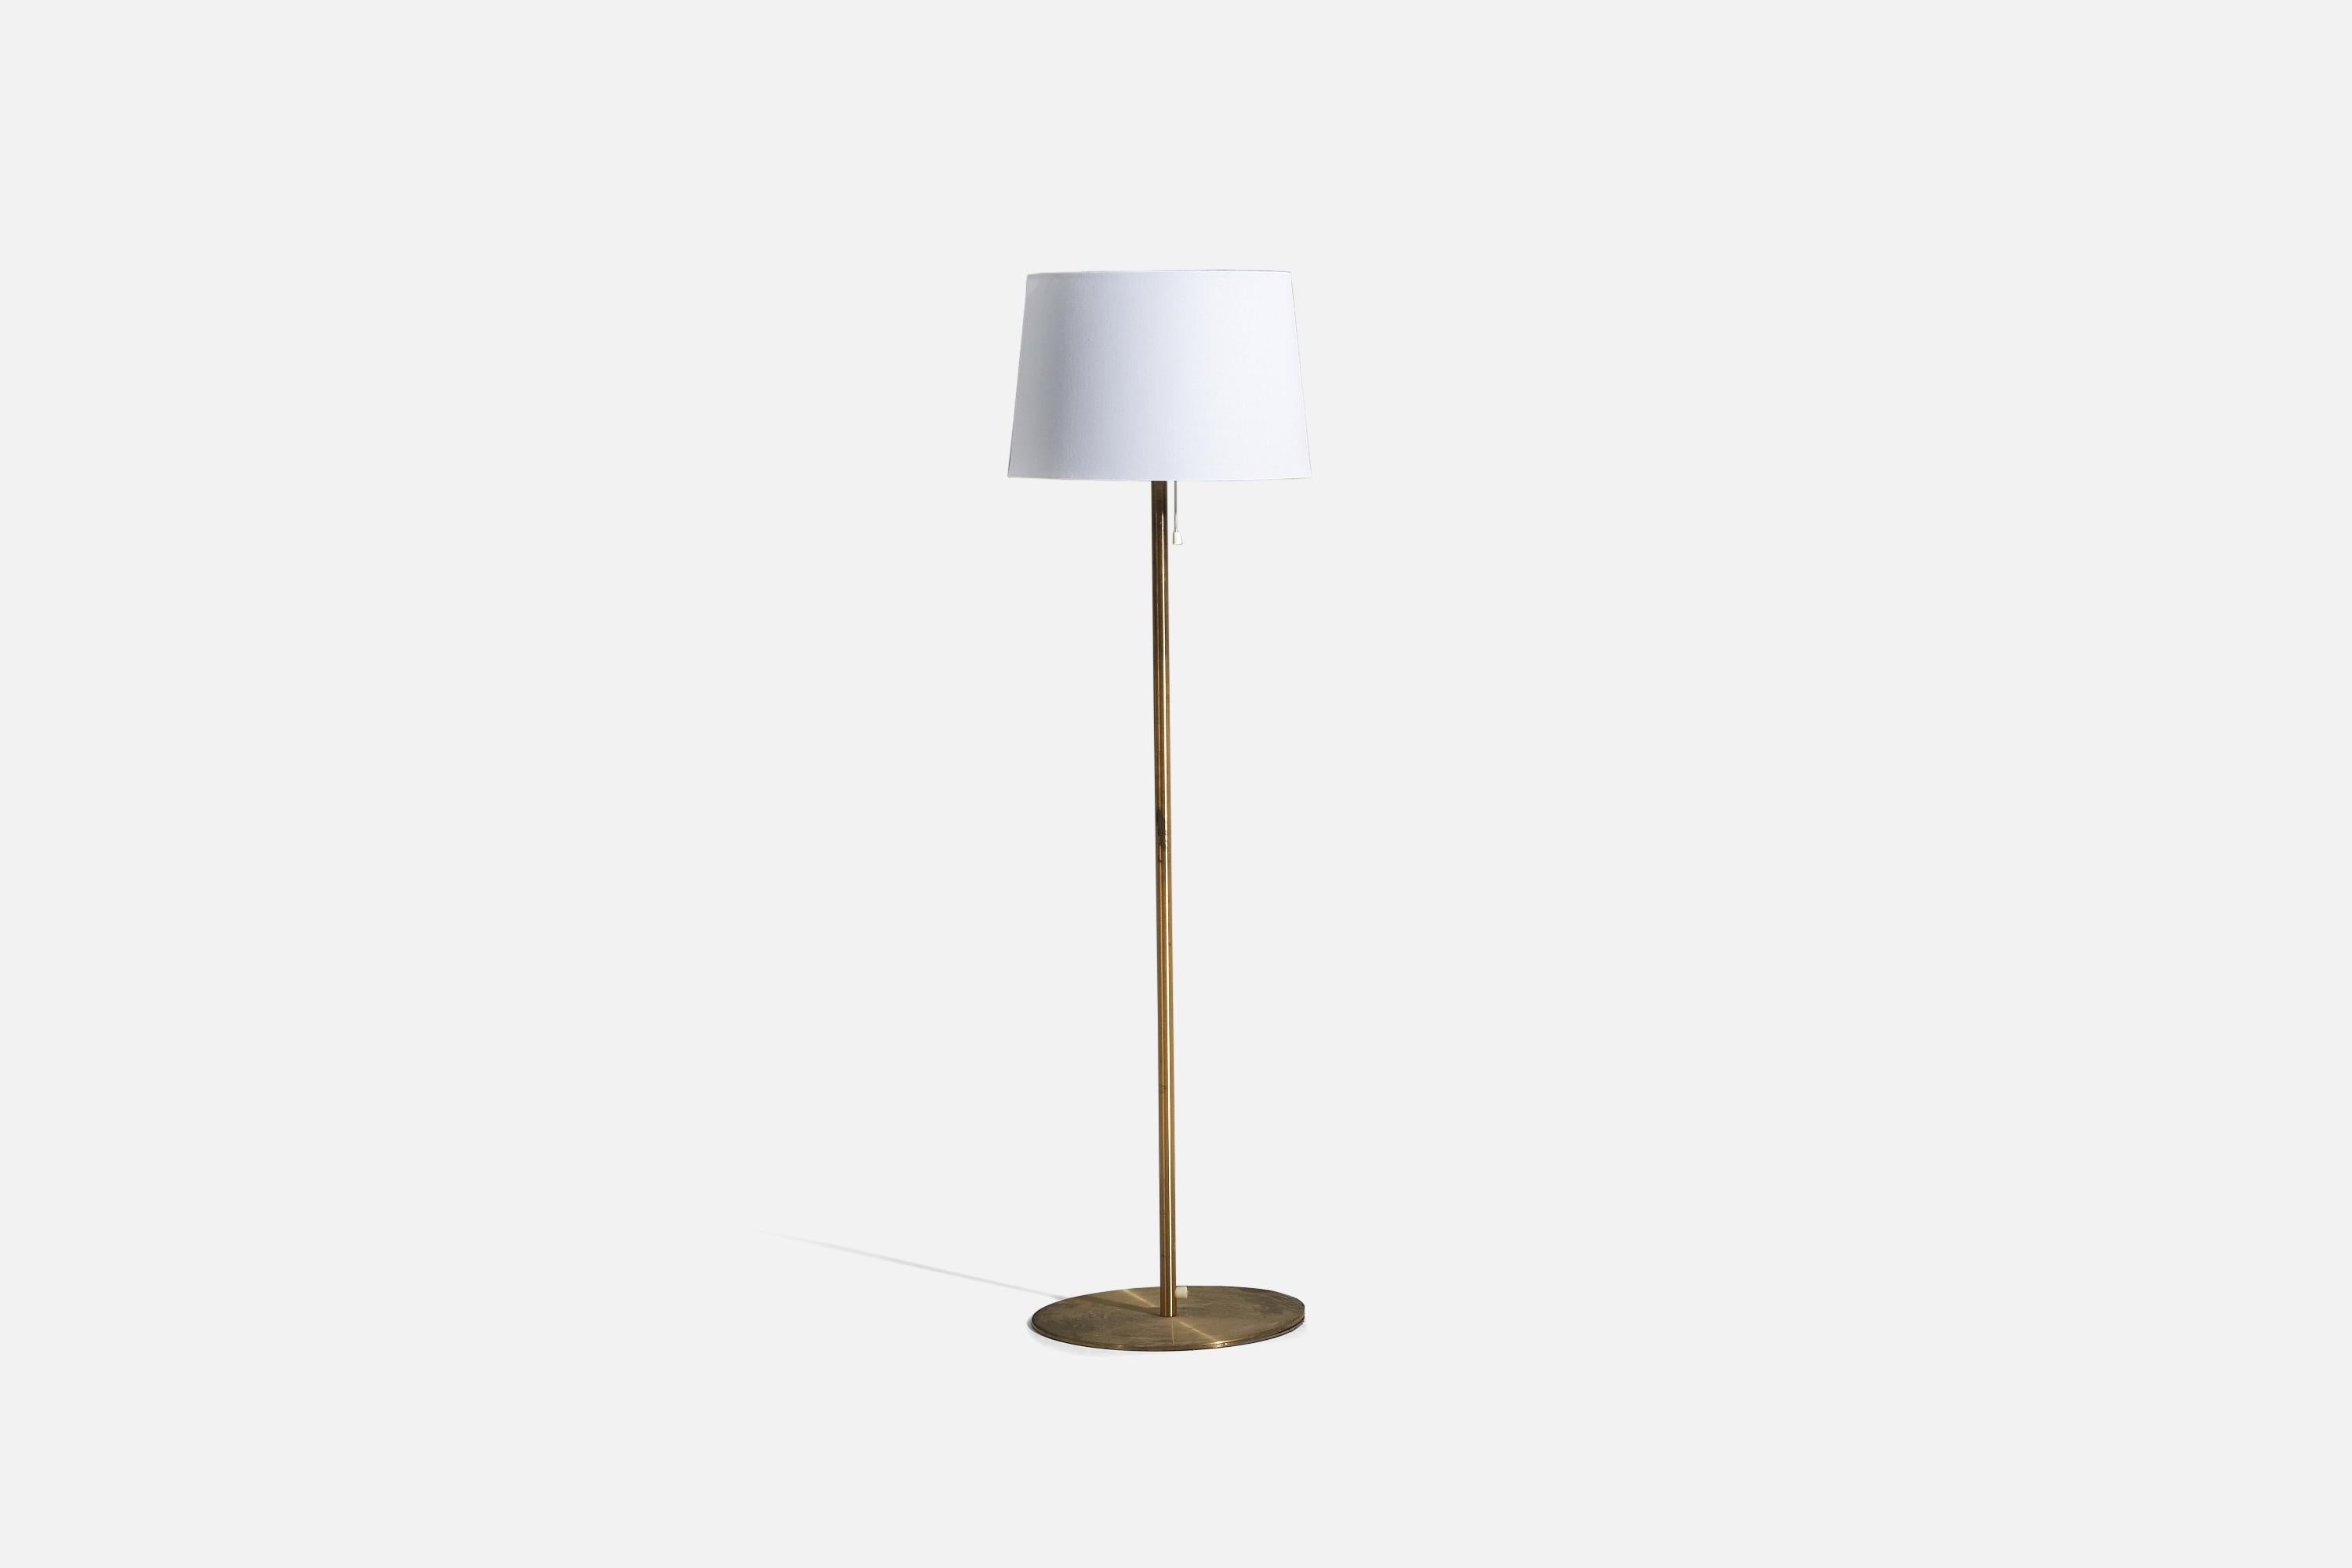 A brass floor lamp with a fabric lampshade, designed and produced by Luxus Vittsjö, Sweden, 1960s.

Sold with Lampshade 
Dimensions of Floor Lamp (inches) : 48.1875 x 13.75 x 13.75 (H x W x D)
Dimensions of Shade (inches) : 13 x 15 x 10 (T x B x